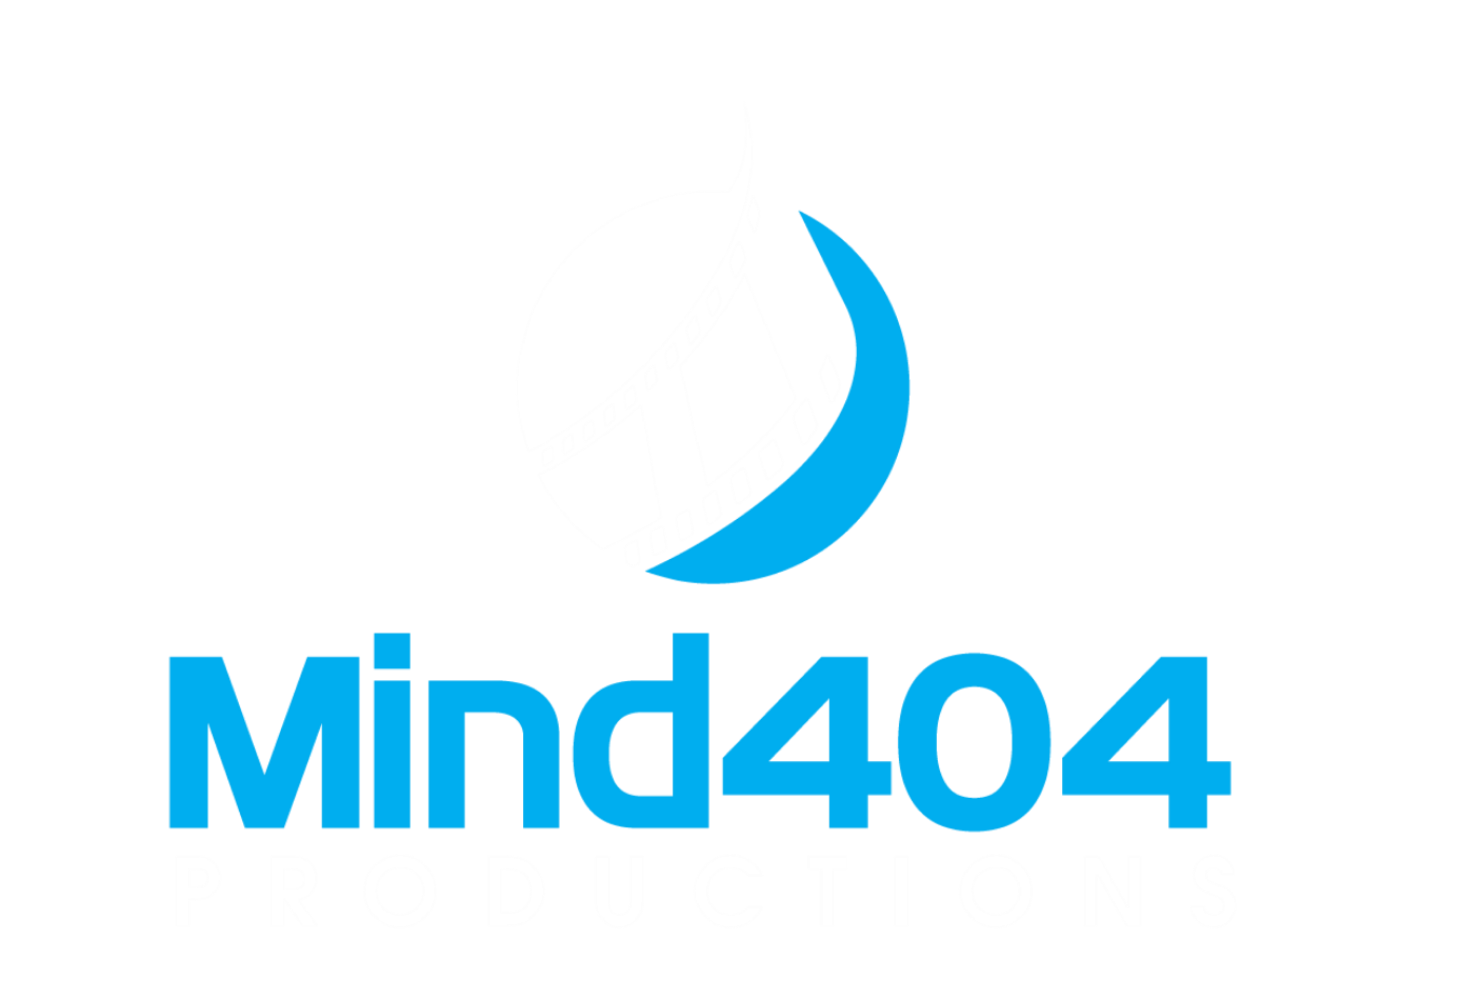 Mind404 Productions